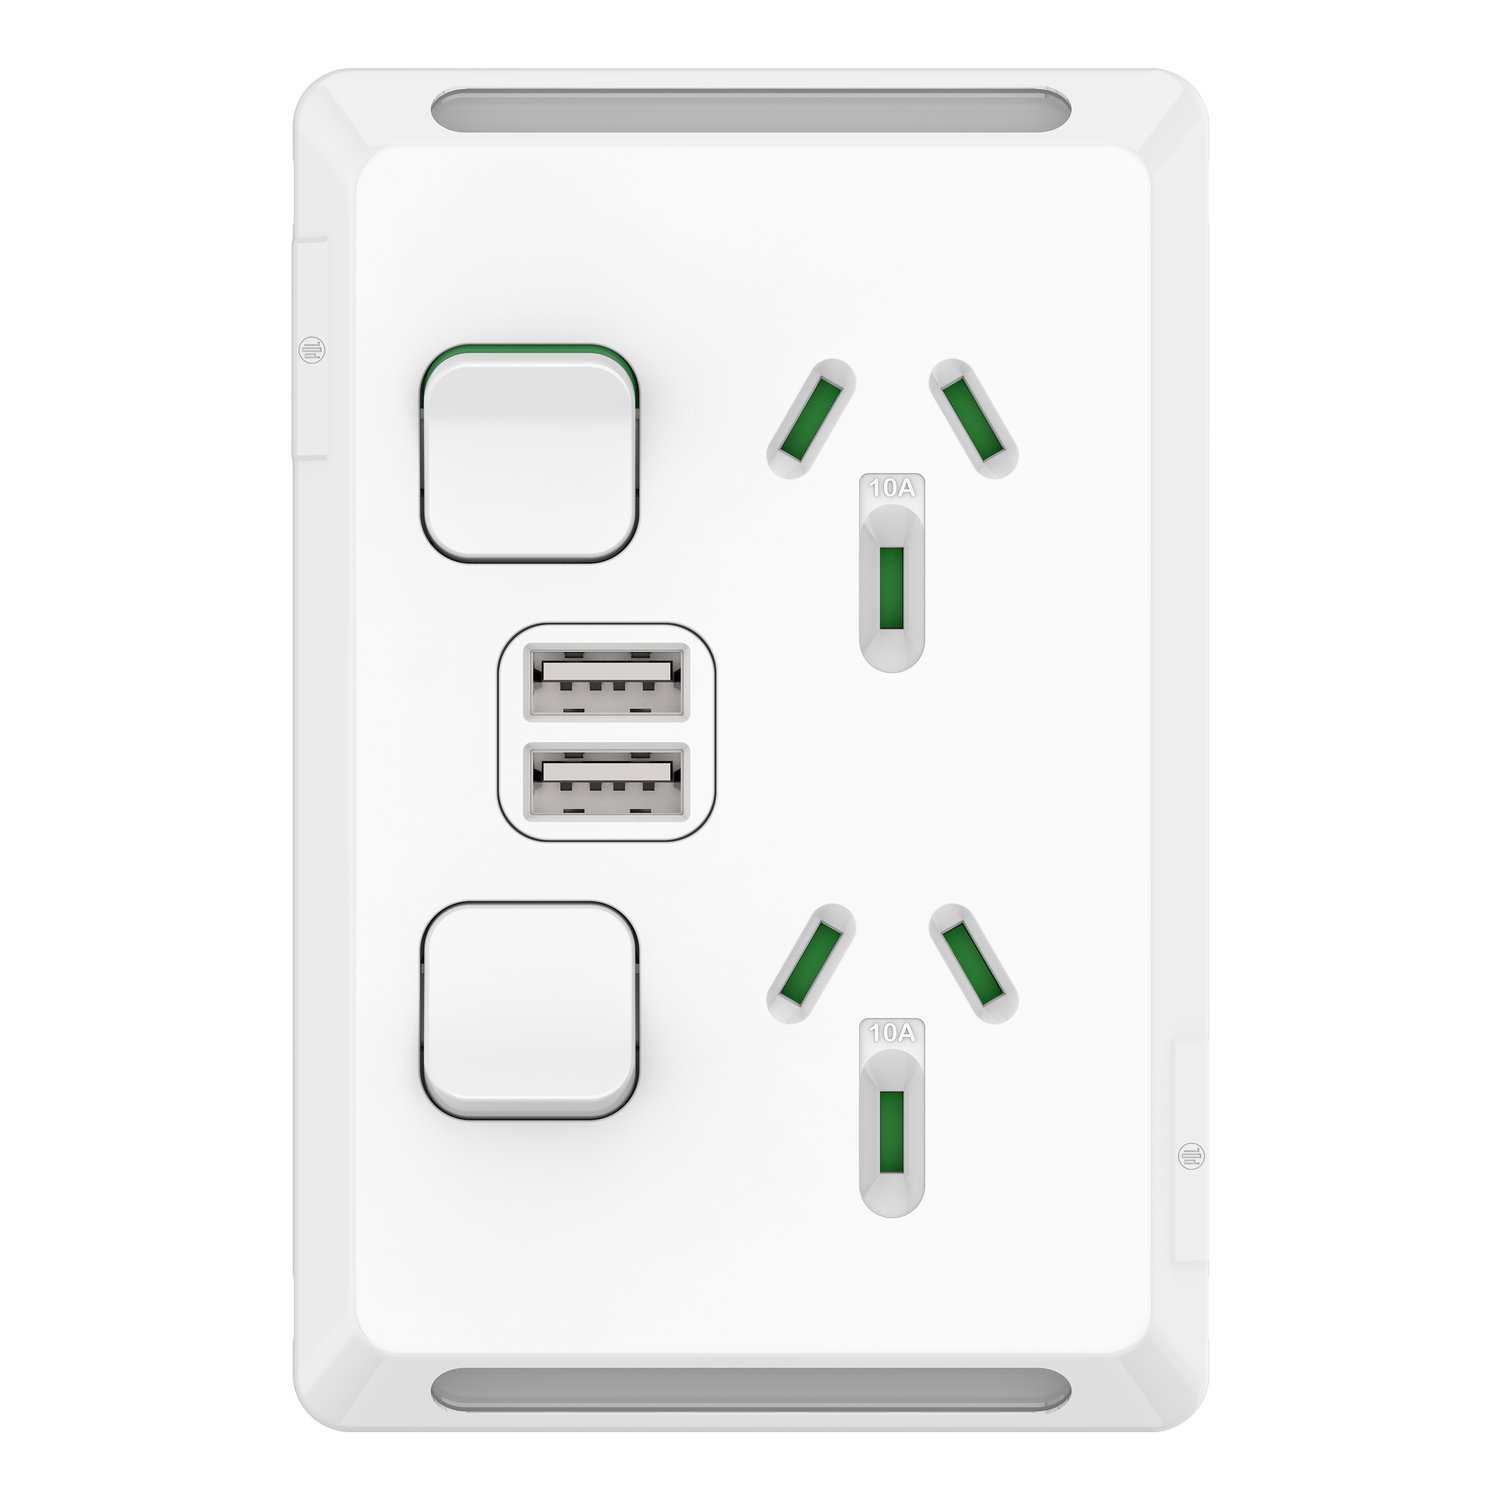 https://download.schneider-electric.com/files?p_Doc_Ref=PDLP392USB2-XW_front_view&p_File_Type=rendition_1500_jpg